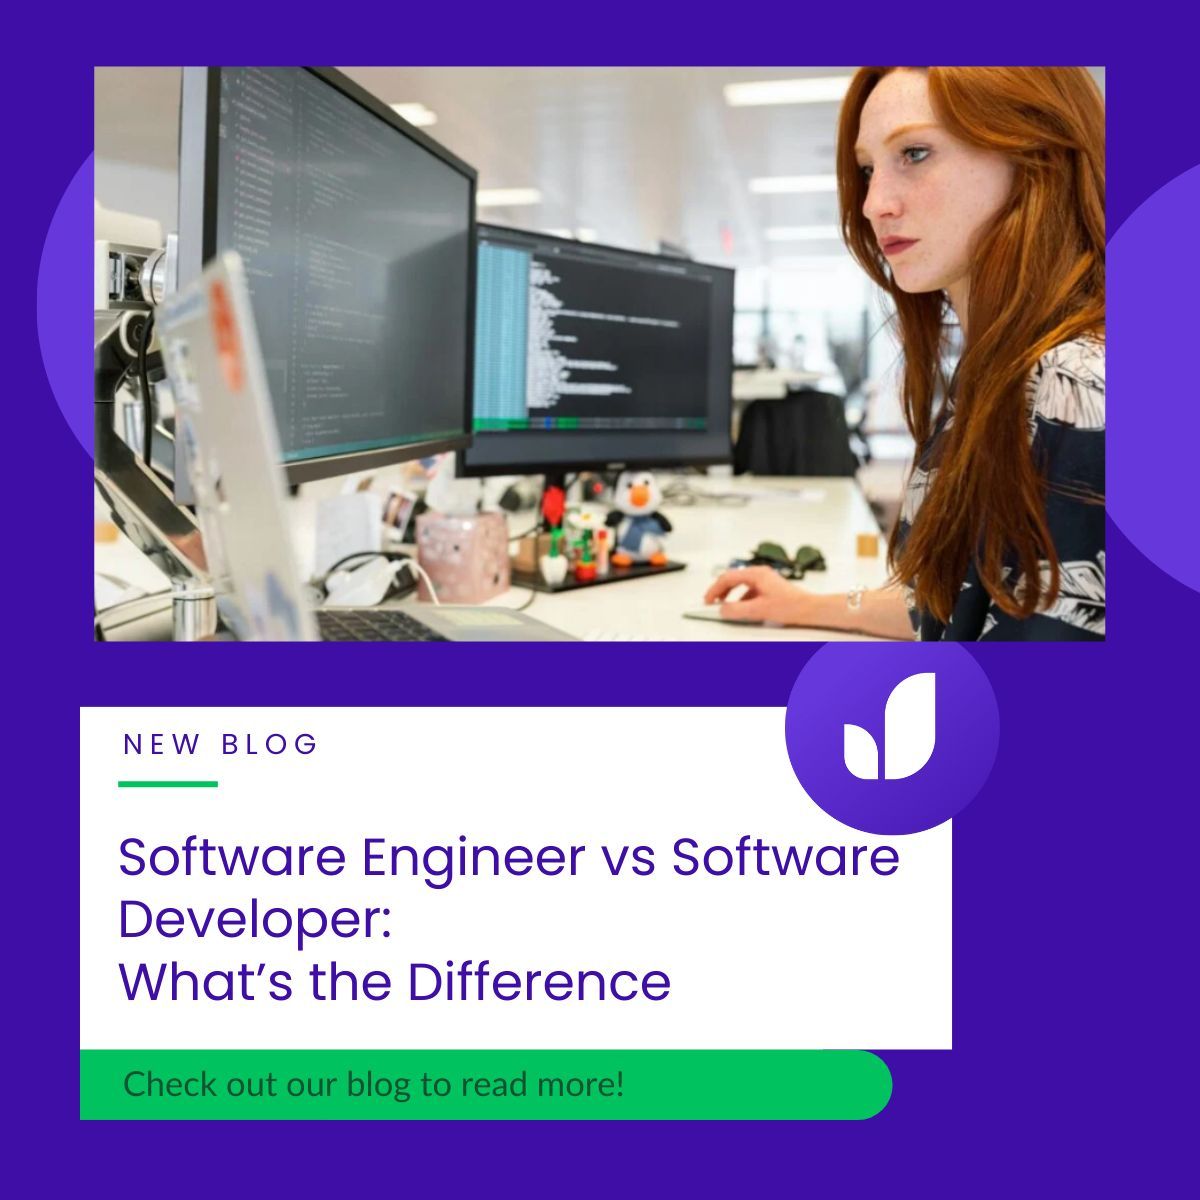 Explore the differences between Software Engineers and Software Developers in our latest blog! Gain insights into tech career paths and optimize your hiring strategies. #TechCareers #SoftwareEngineering #SoftwareDevelopment #CareerInsights 

Read here: rightfitadvisors.com/blog/software-…